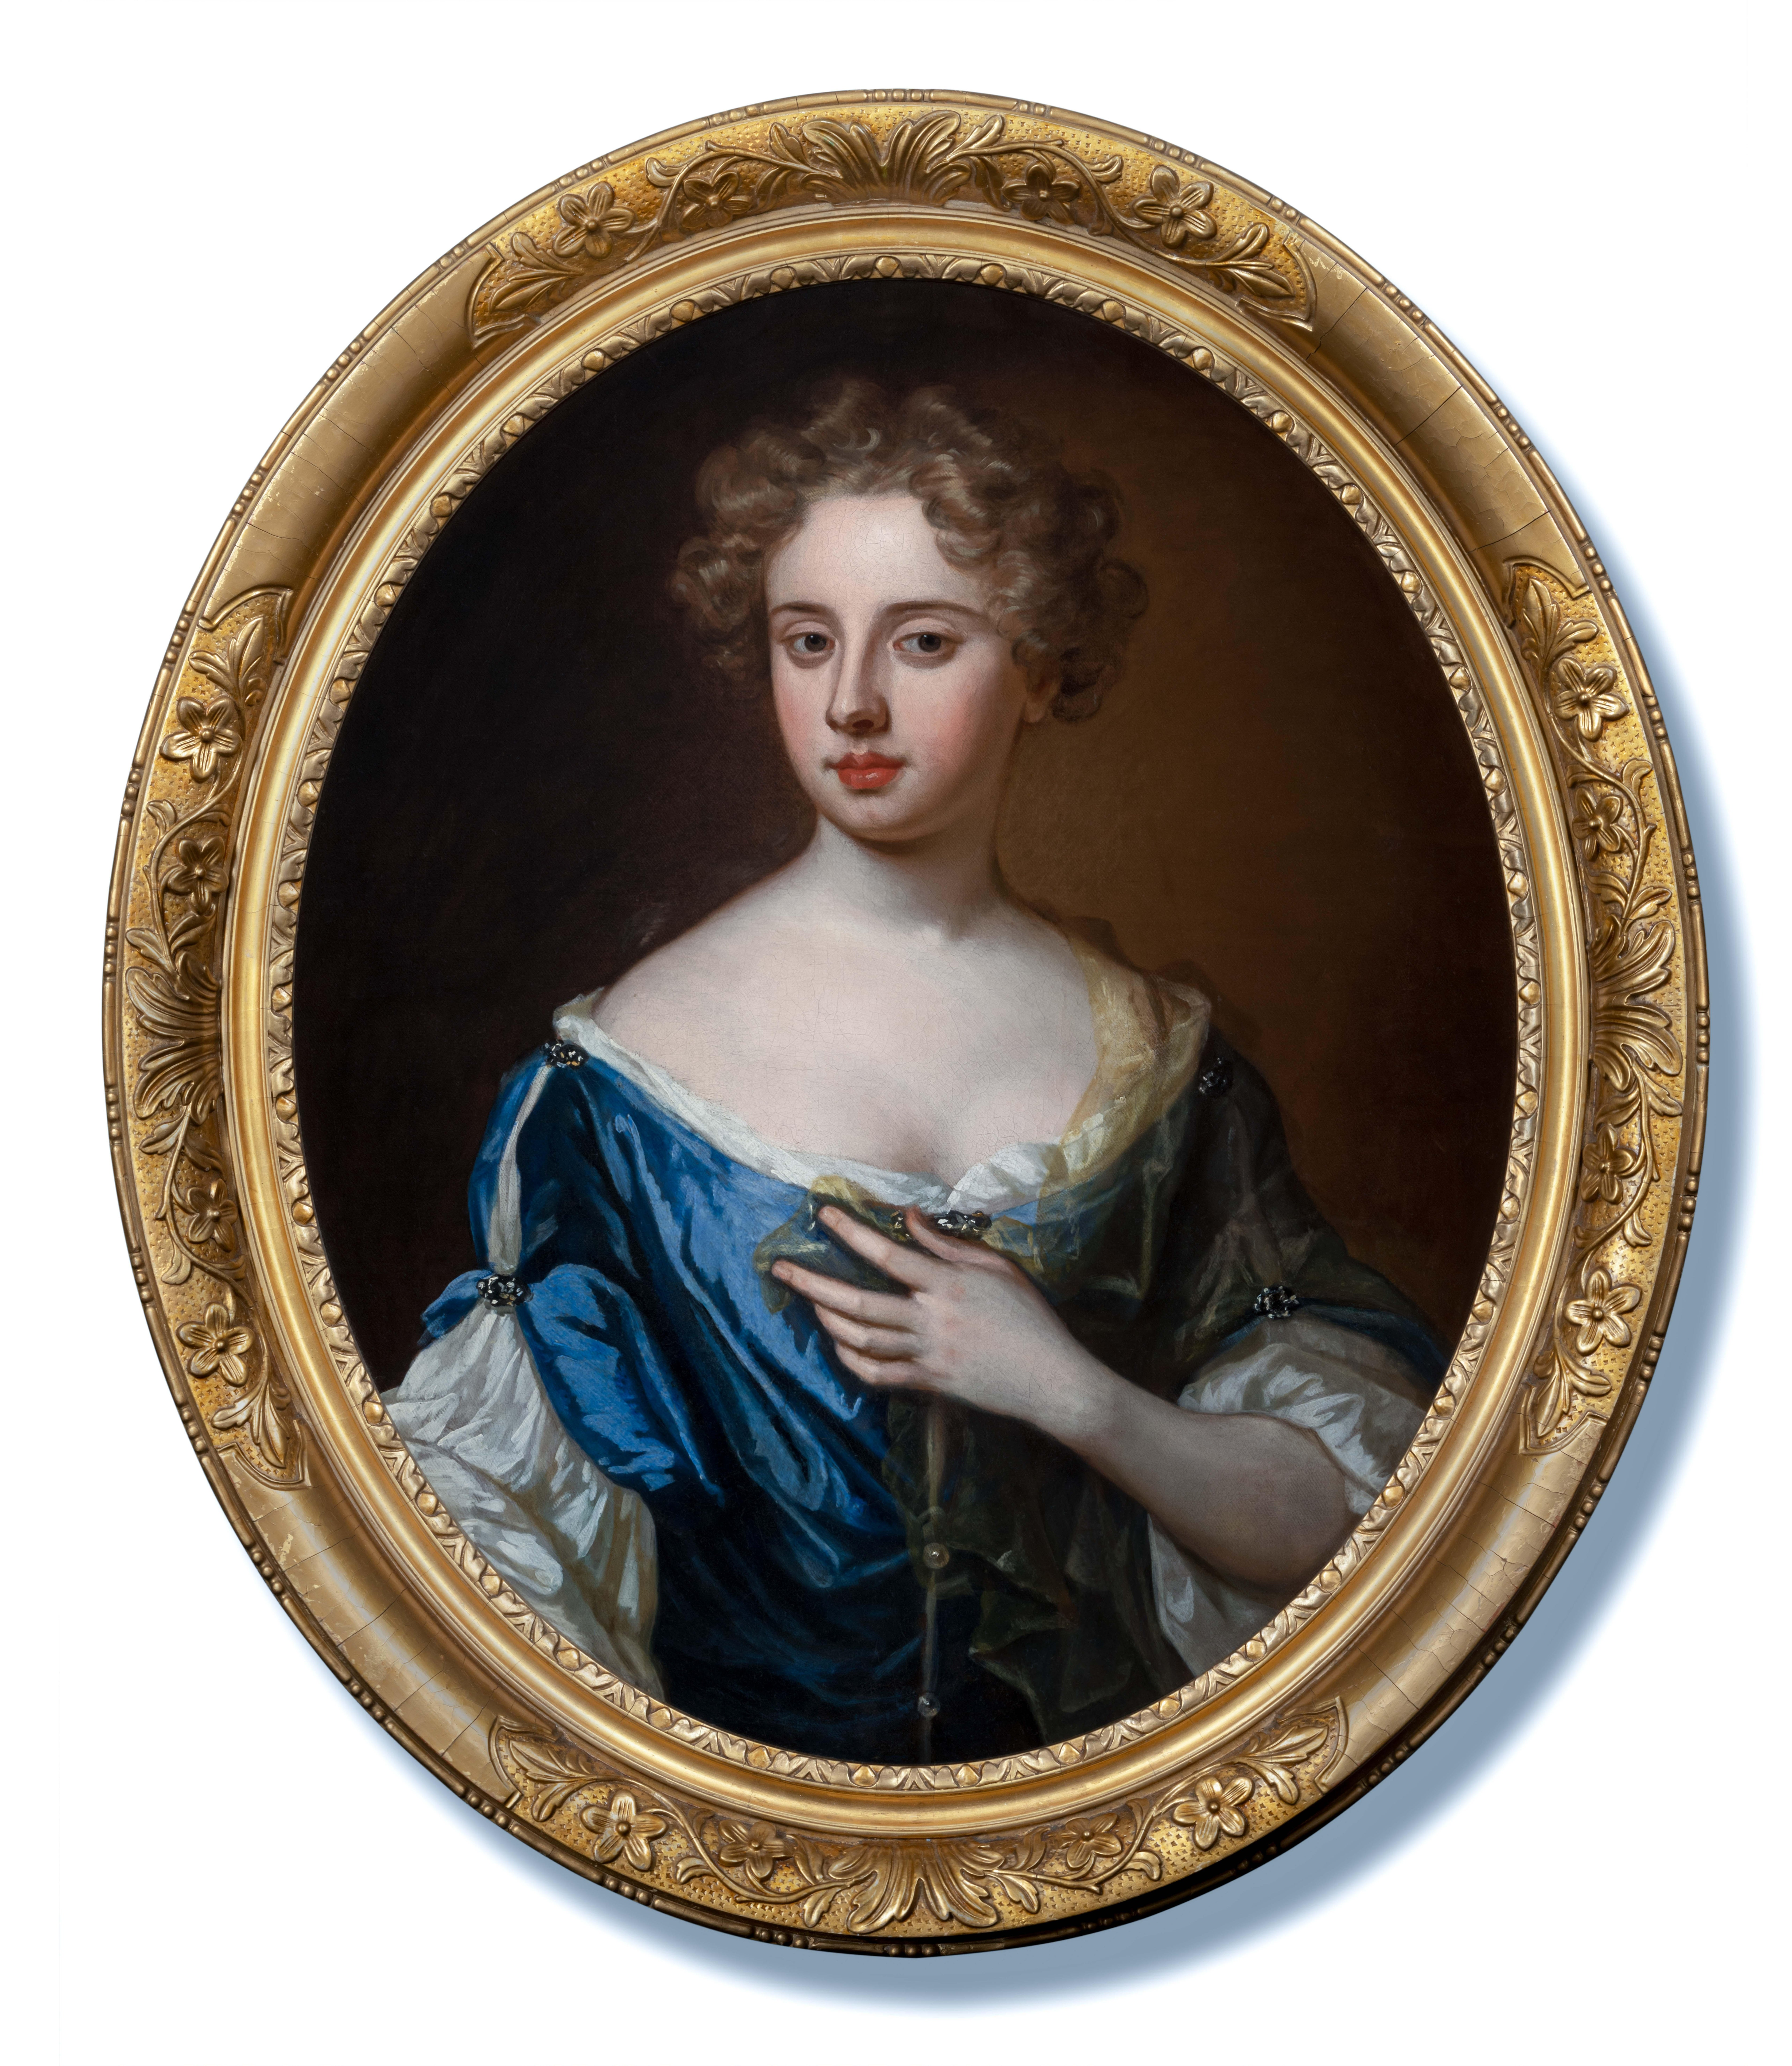 Kneller Godfrey Portrait Painting - Portrait of a Lady in a Blue Gown Holding a Sheer Scarf Painting Godfrey Kneller